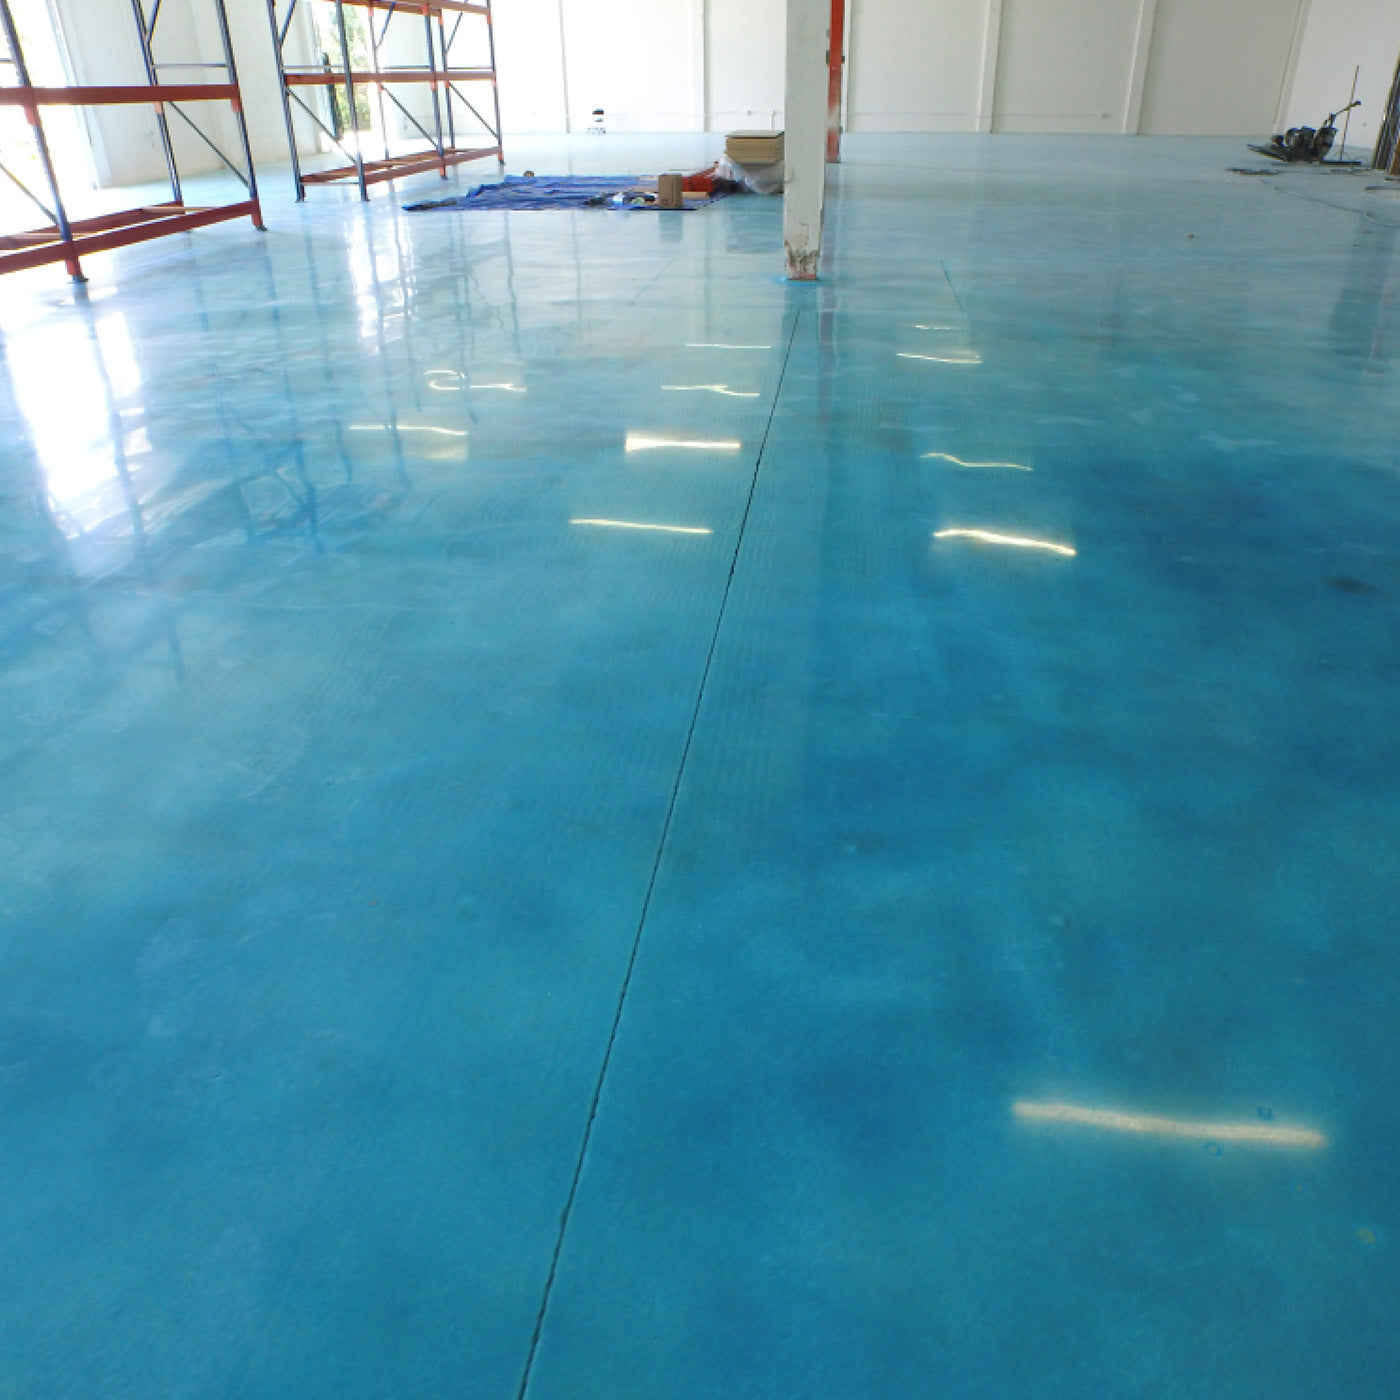 Blue epoxy floor in large interior space | XPS - xtreme polishing systems, chantilly flooring, polishing store, flooring supplies